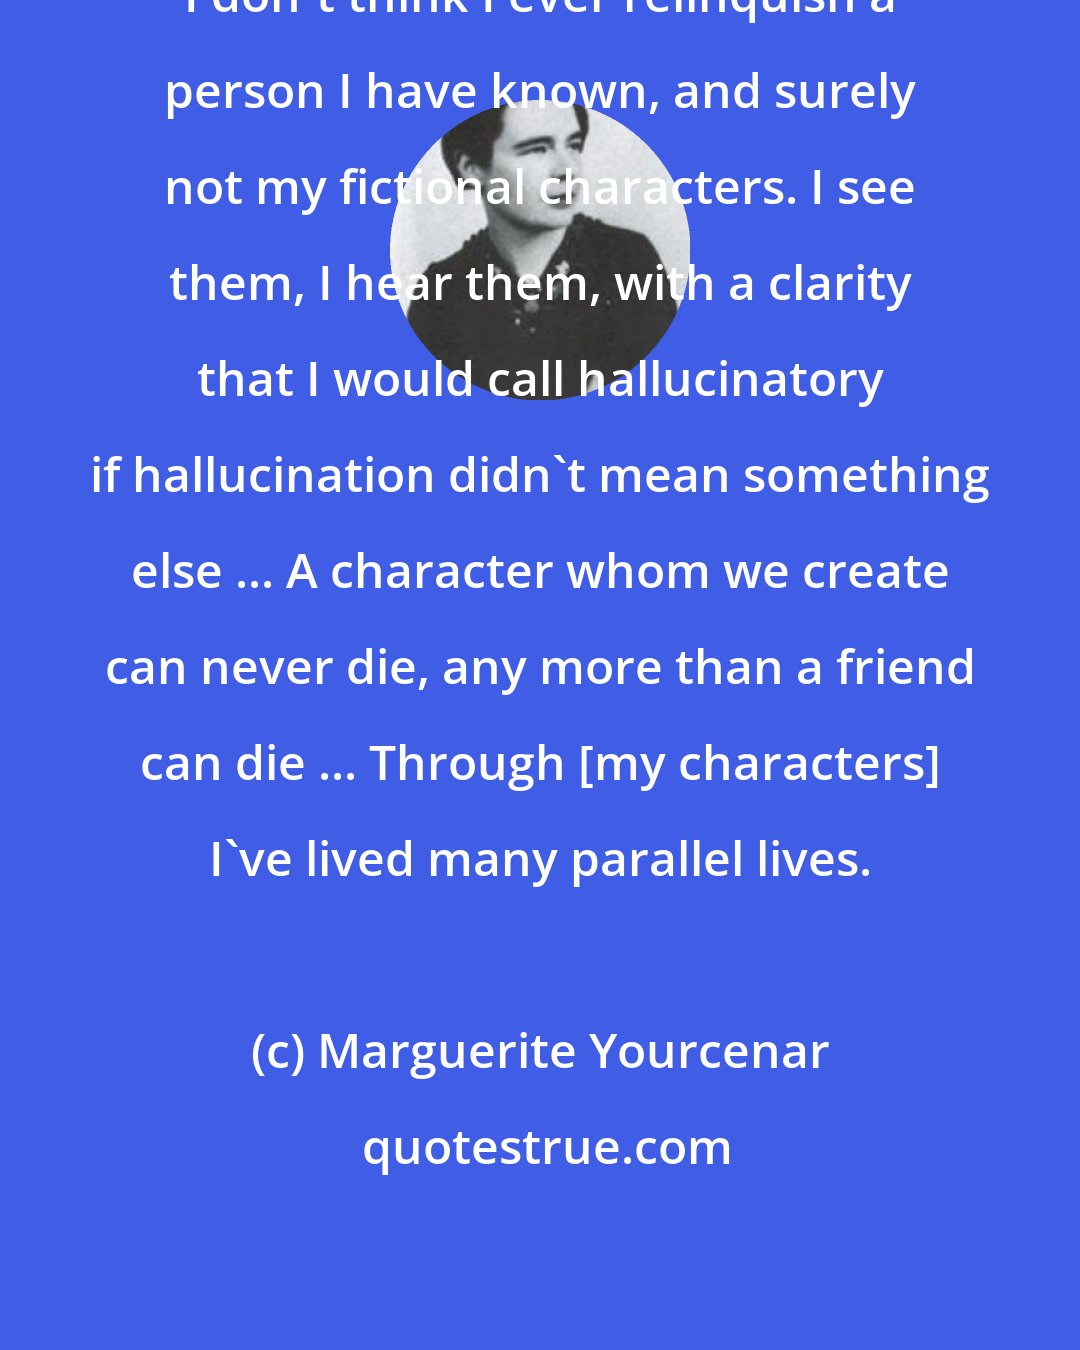 Marguerite Yourcenar: I don't think I ever relinquish a person I have known, and surely not my fictional characters. I see them, I hear them, with a clarity that I would call hallucinatory if hallucination didn't mean something else ... A character whom we create can never die, any more than a friend can die ... Through [my characters] I've lived many parallel lives.